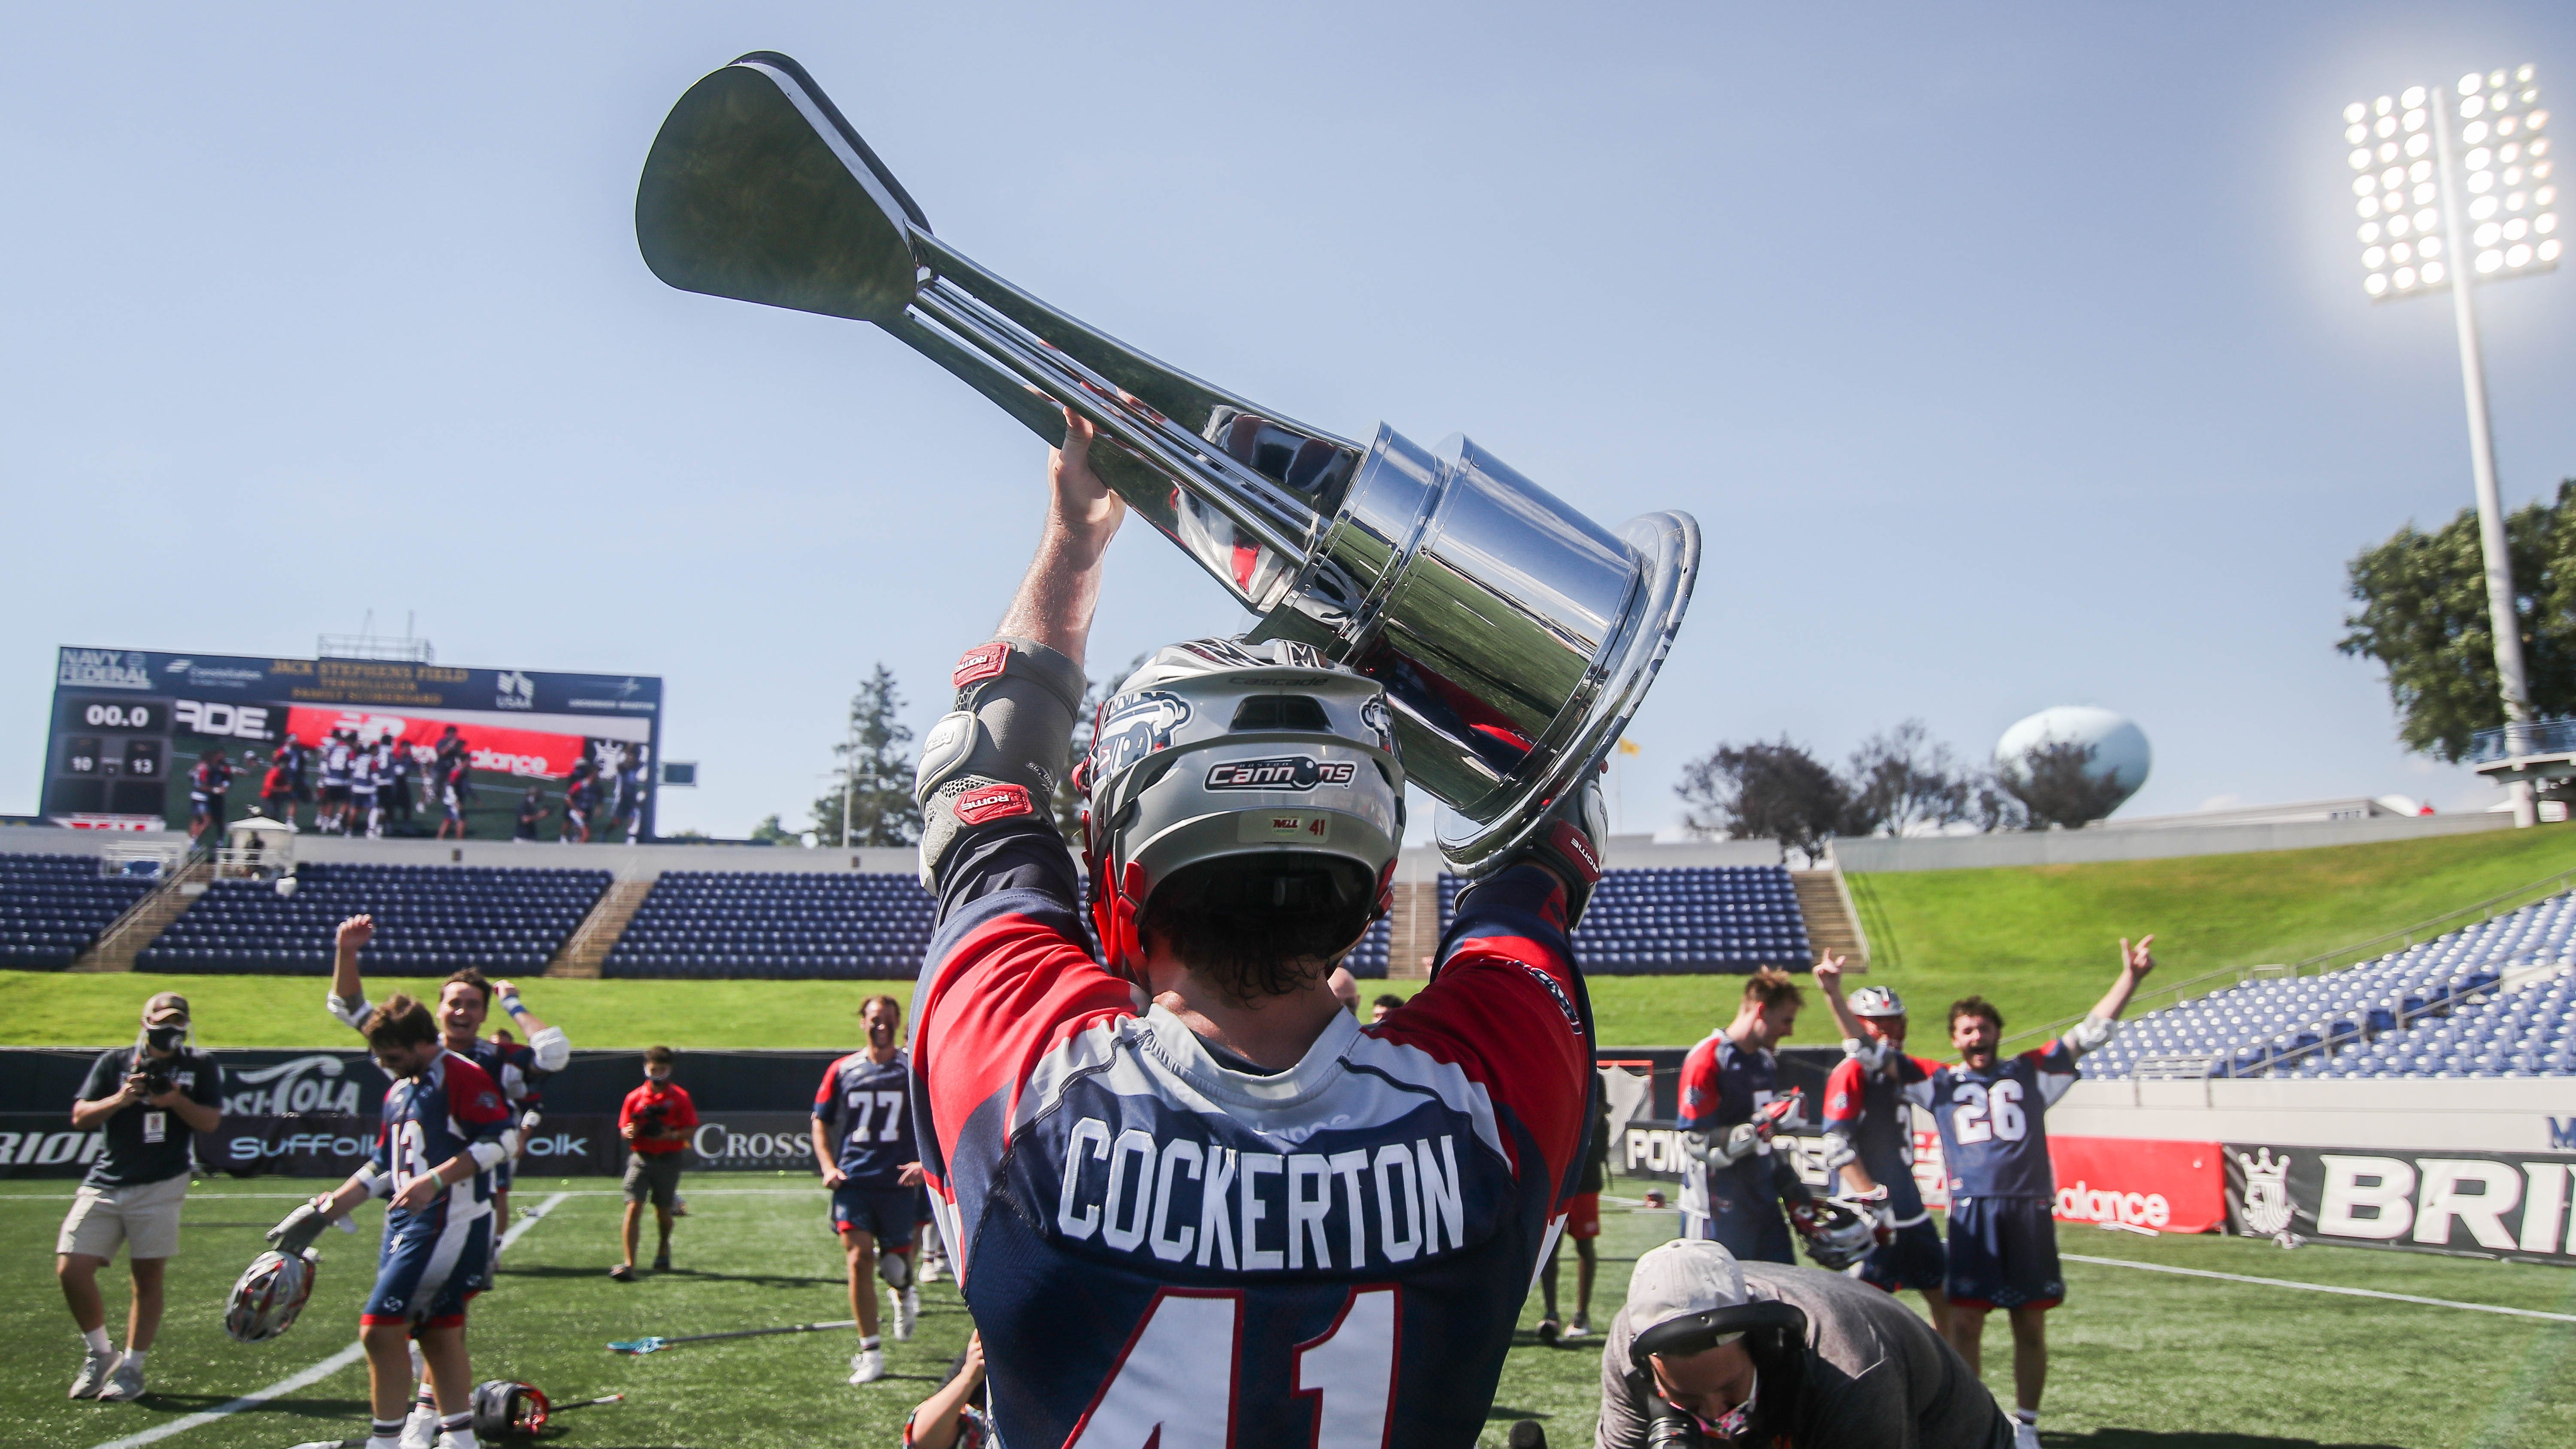 Cannons only fans